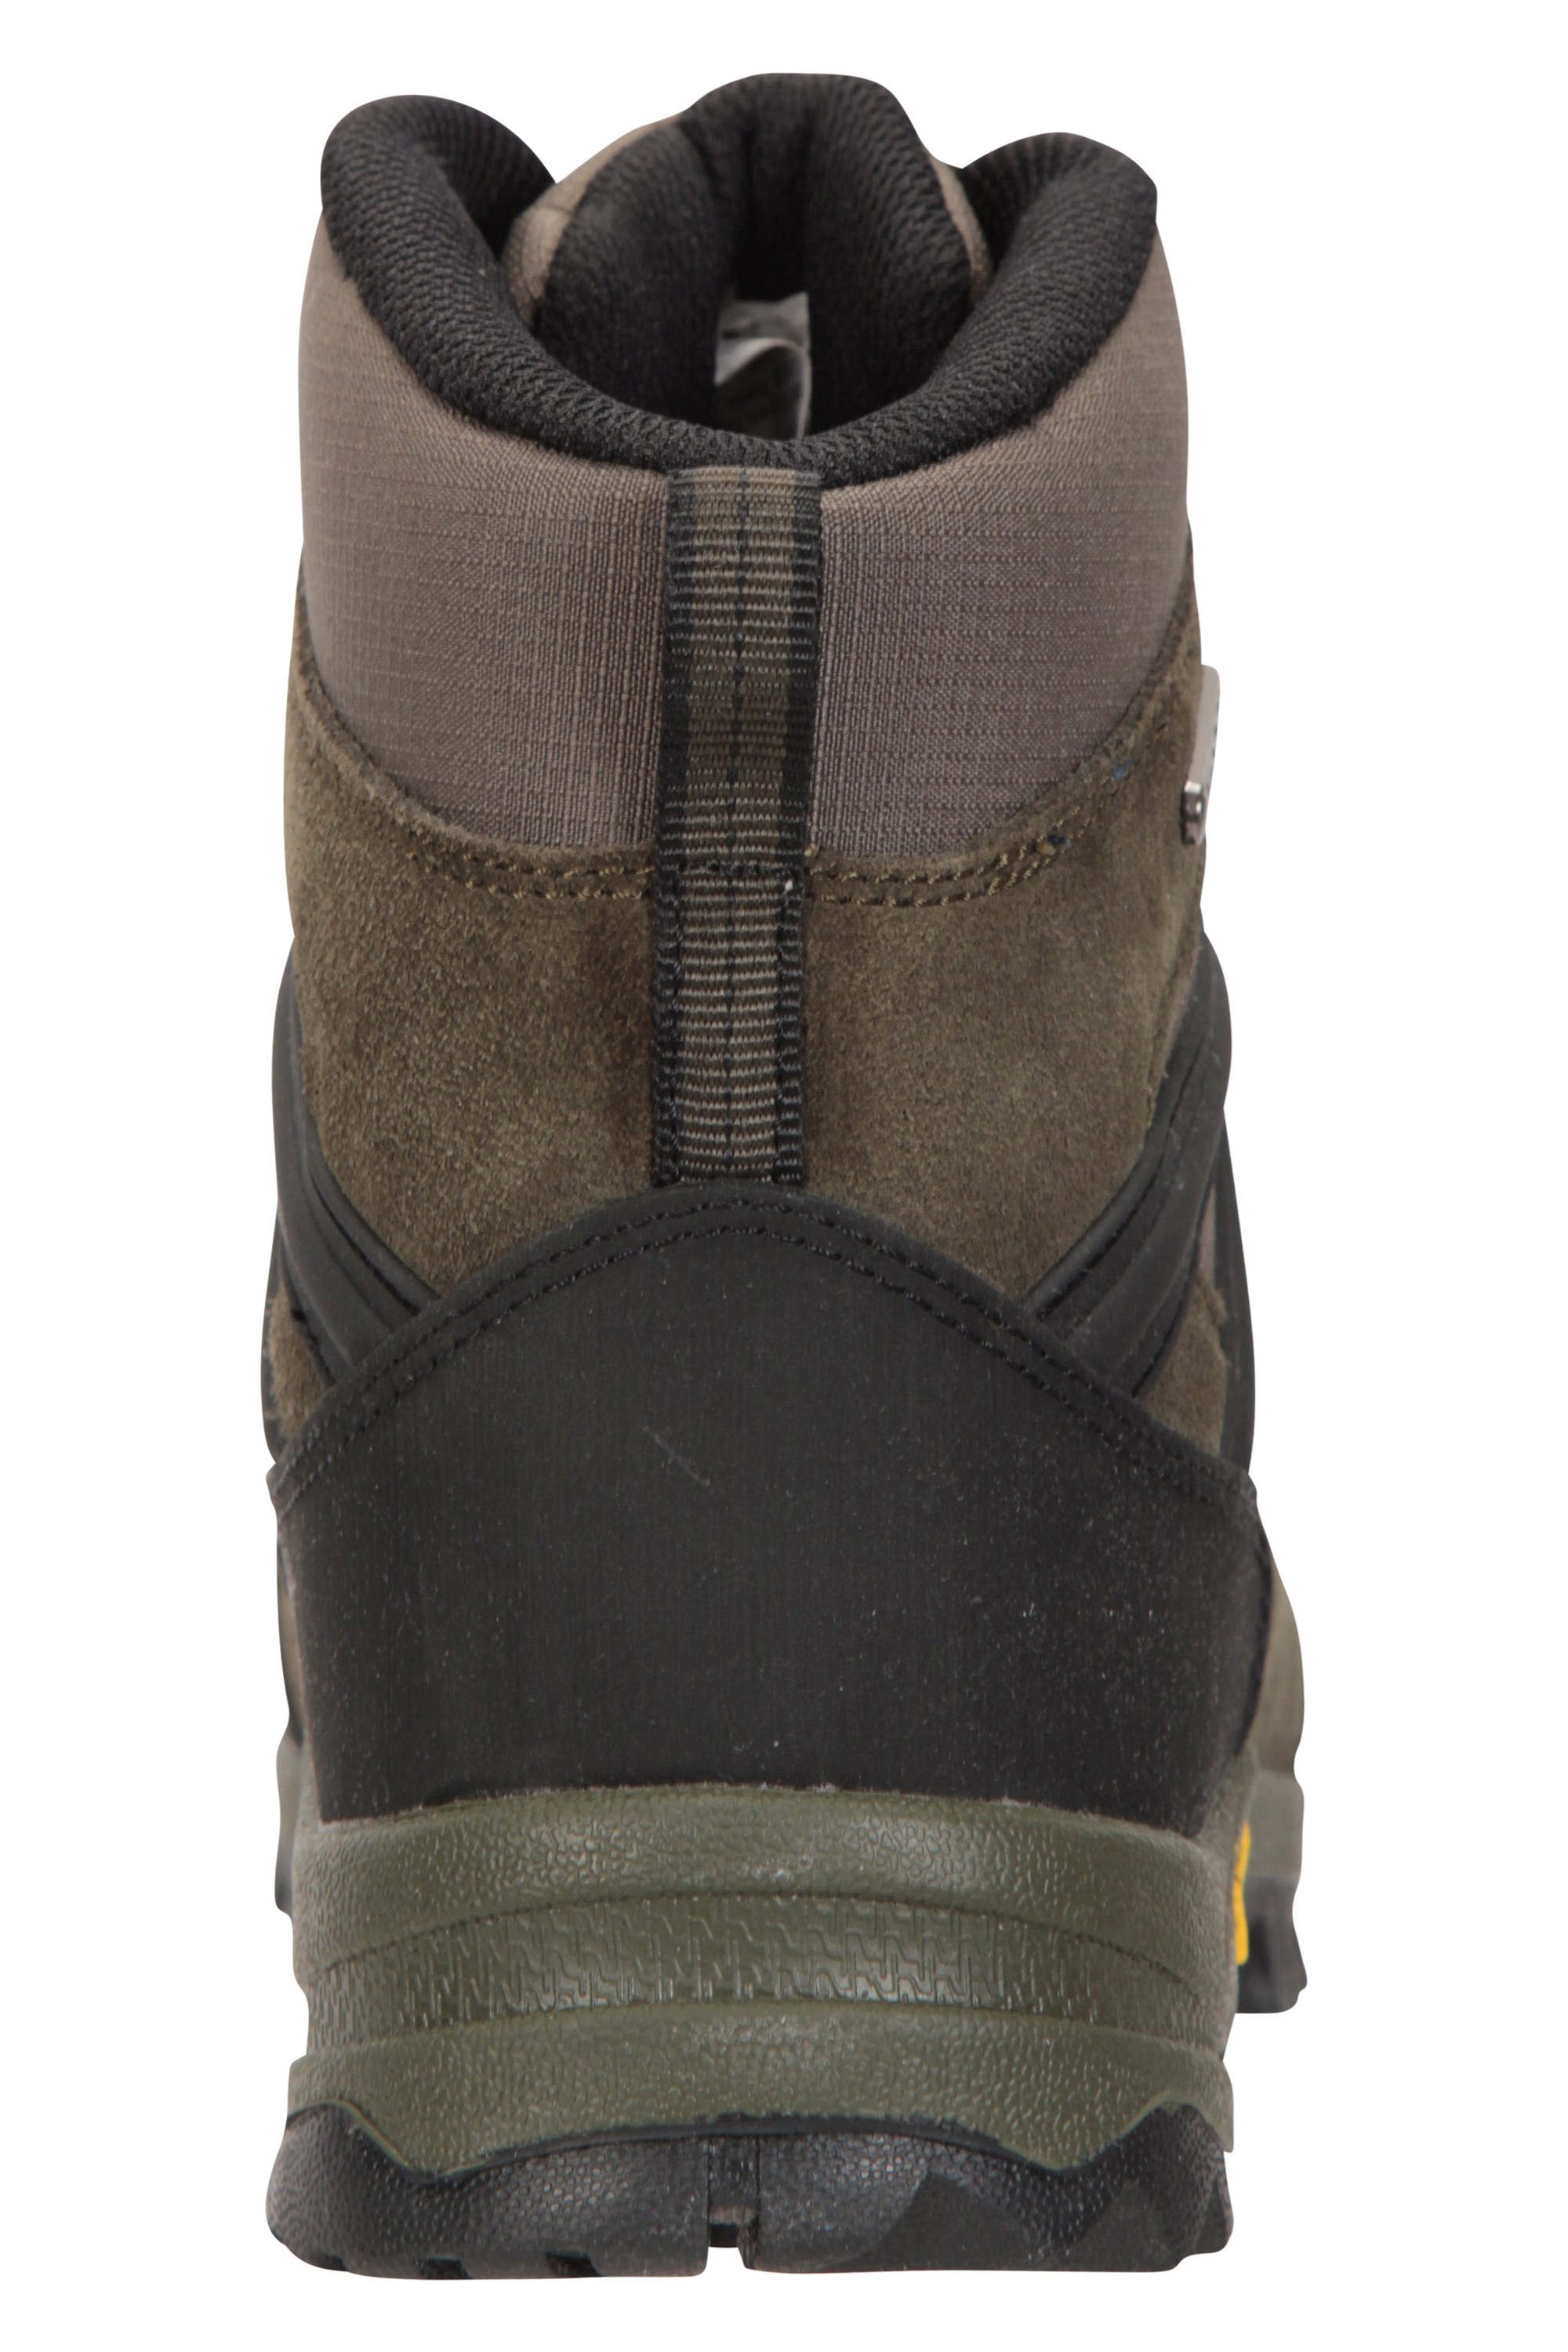 mountain warehouse storm boots